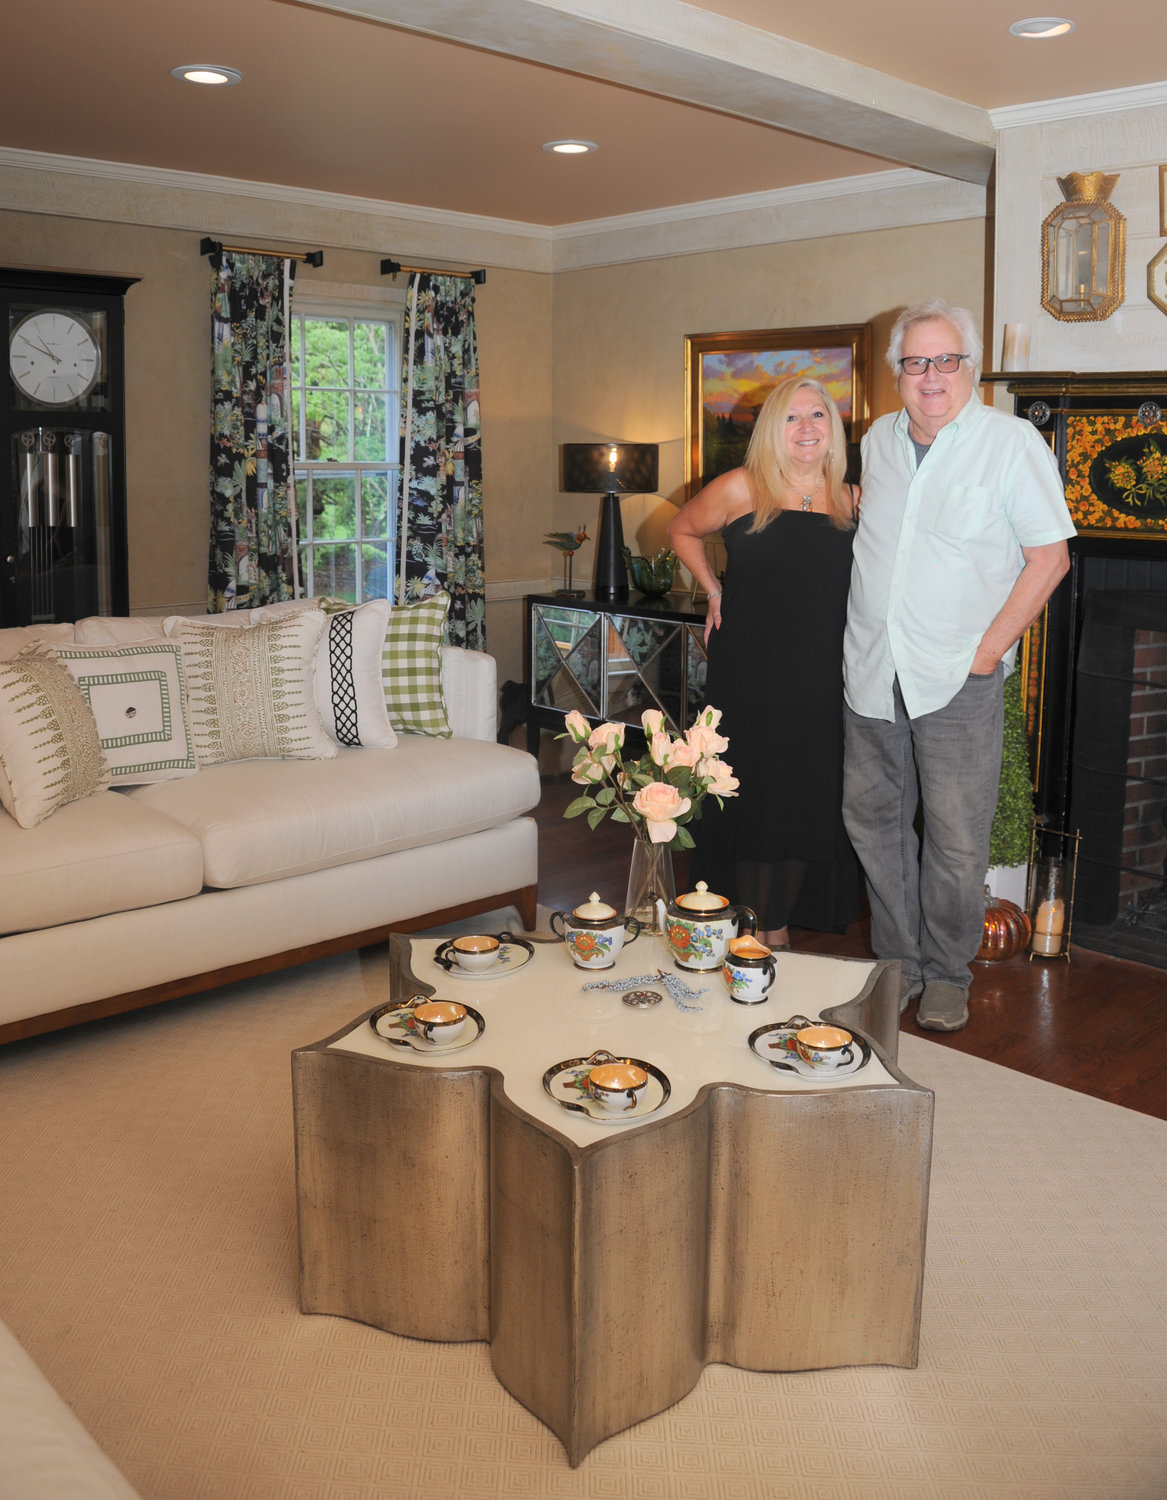 Lisa Lazarus of Lisa Lazarus Interiors and Robert Belchic from Design Style Studios in “A Room for All Seasons.”